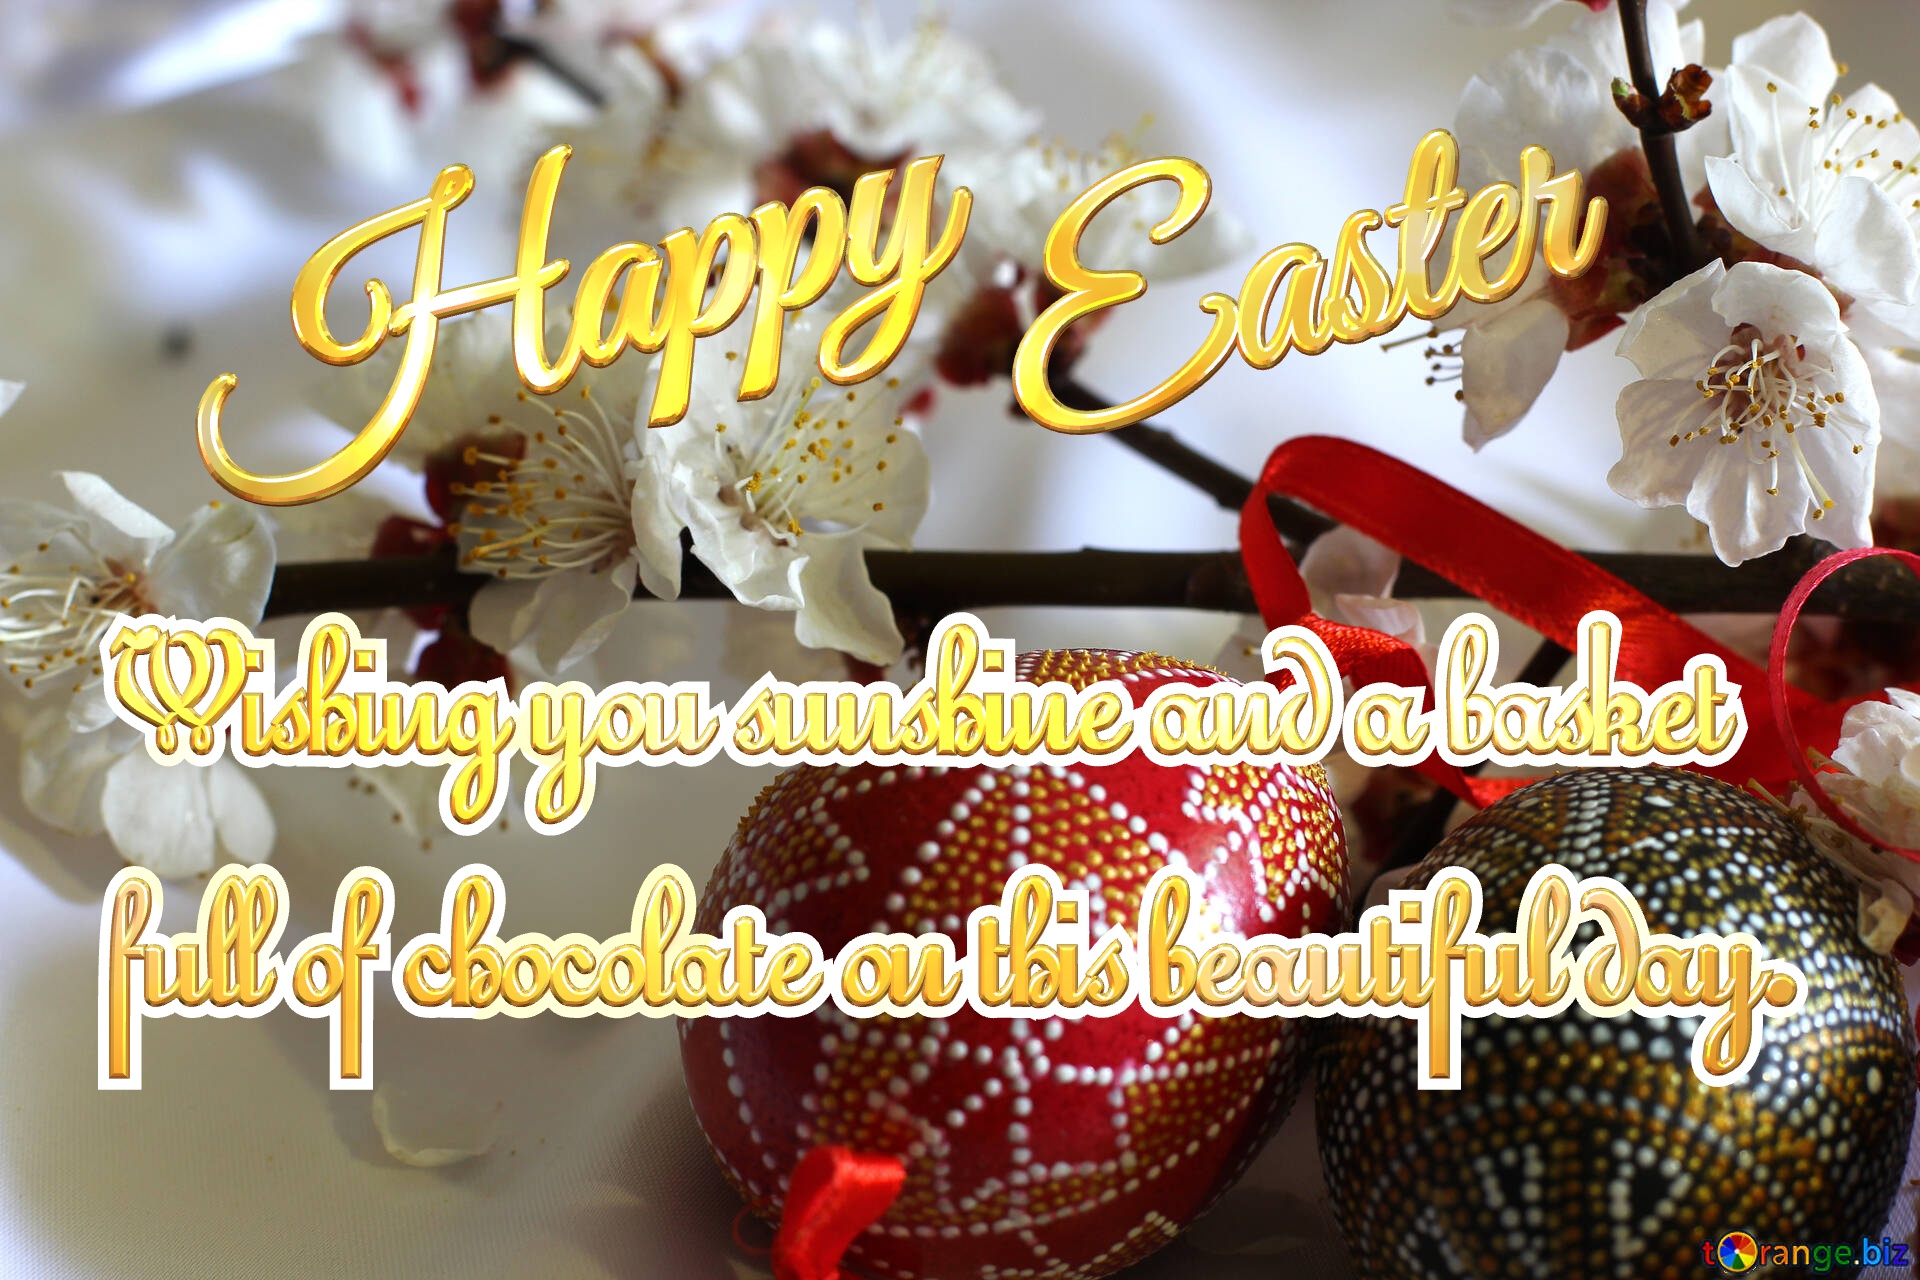 Happy Easter Wishing you sunshine . Background with Easter eggs №29962